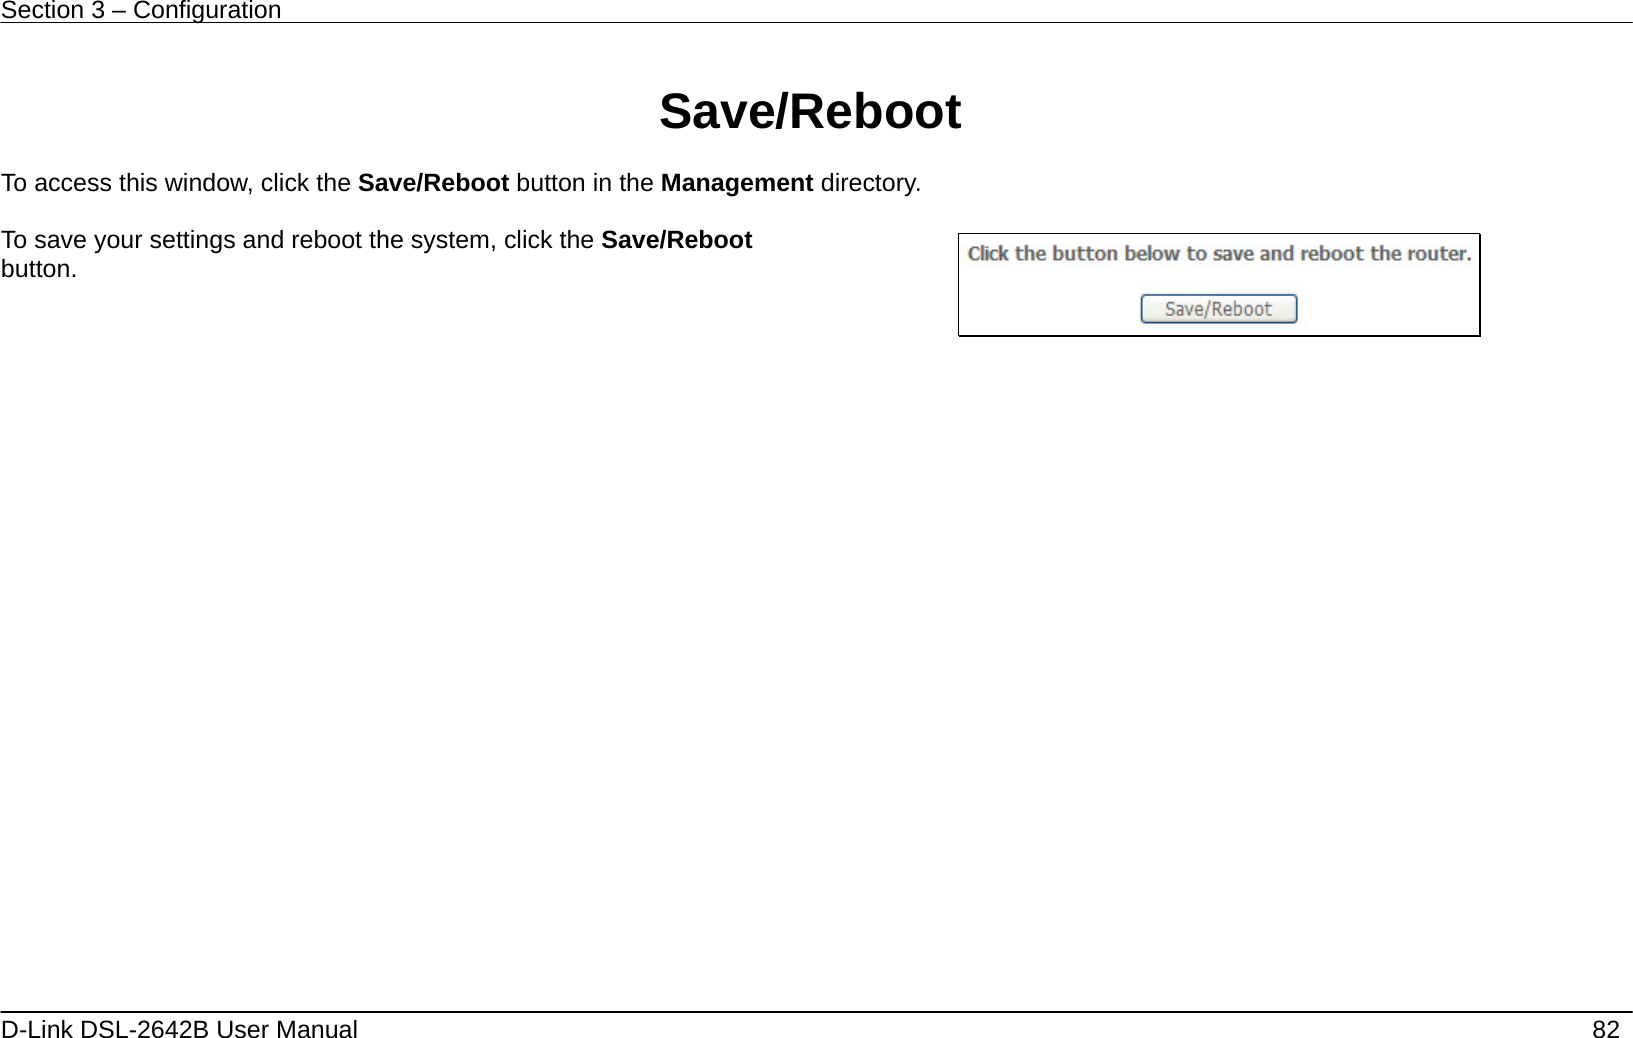 Section 3 – Configuration   D-Link DSL-2642B User Manual    82  Save/Reboot  To access this window, click the Save/Reboot button in the Management directory.  To save your settings and reboot the system, click the Save/Reboot button.   